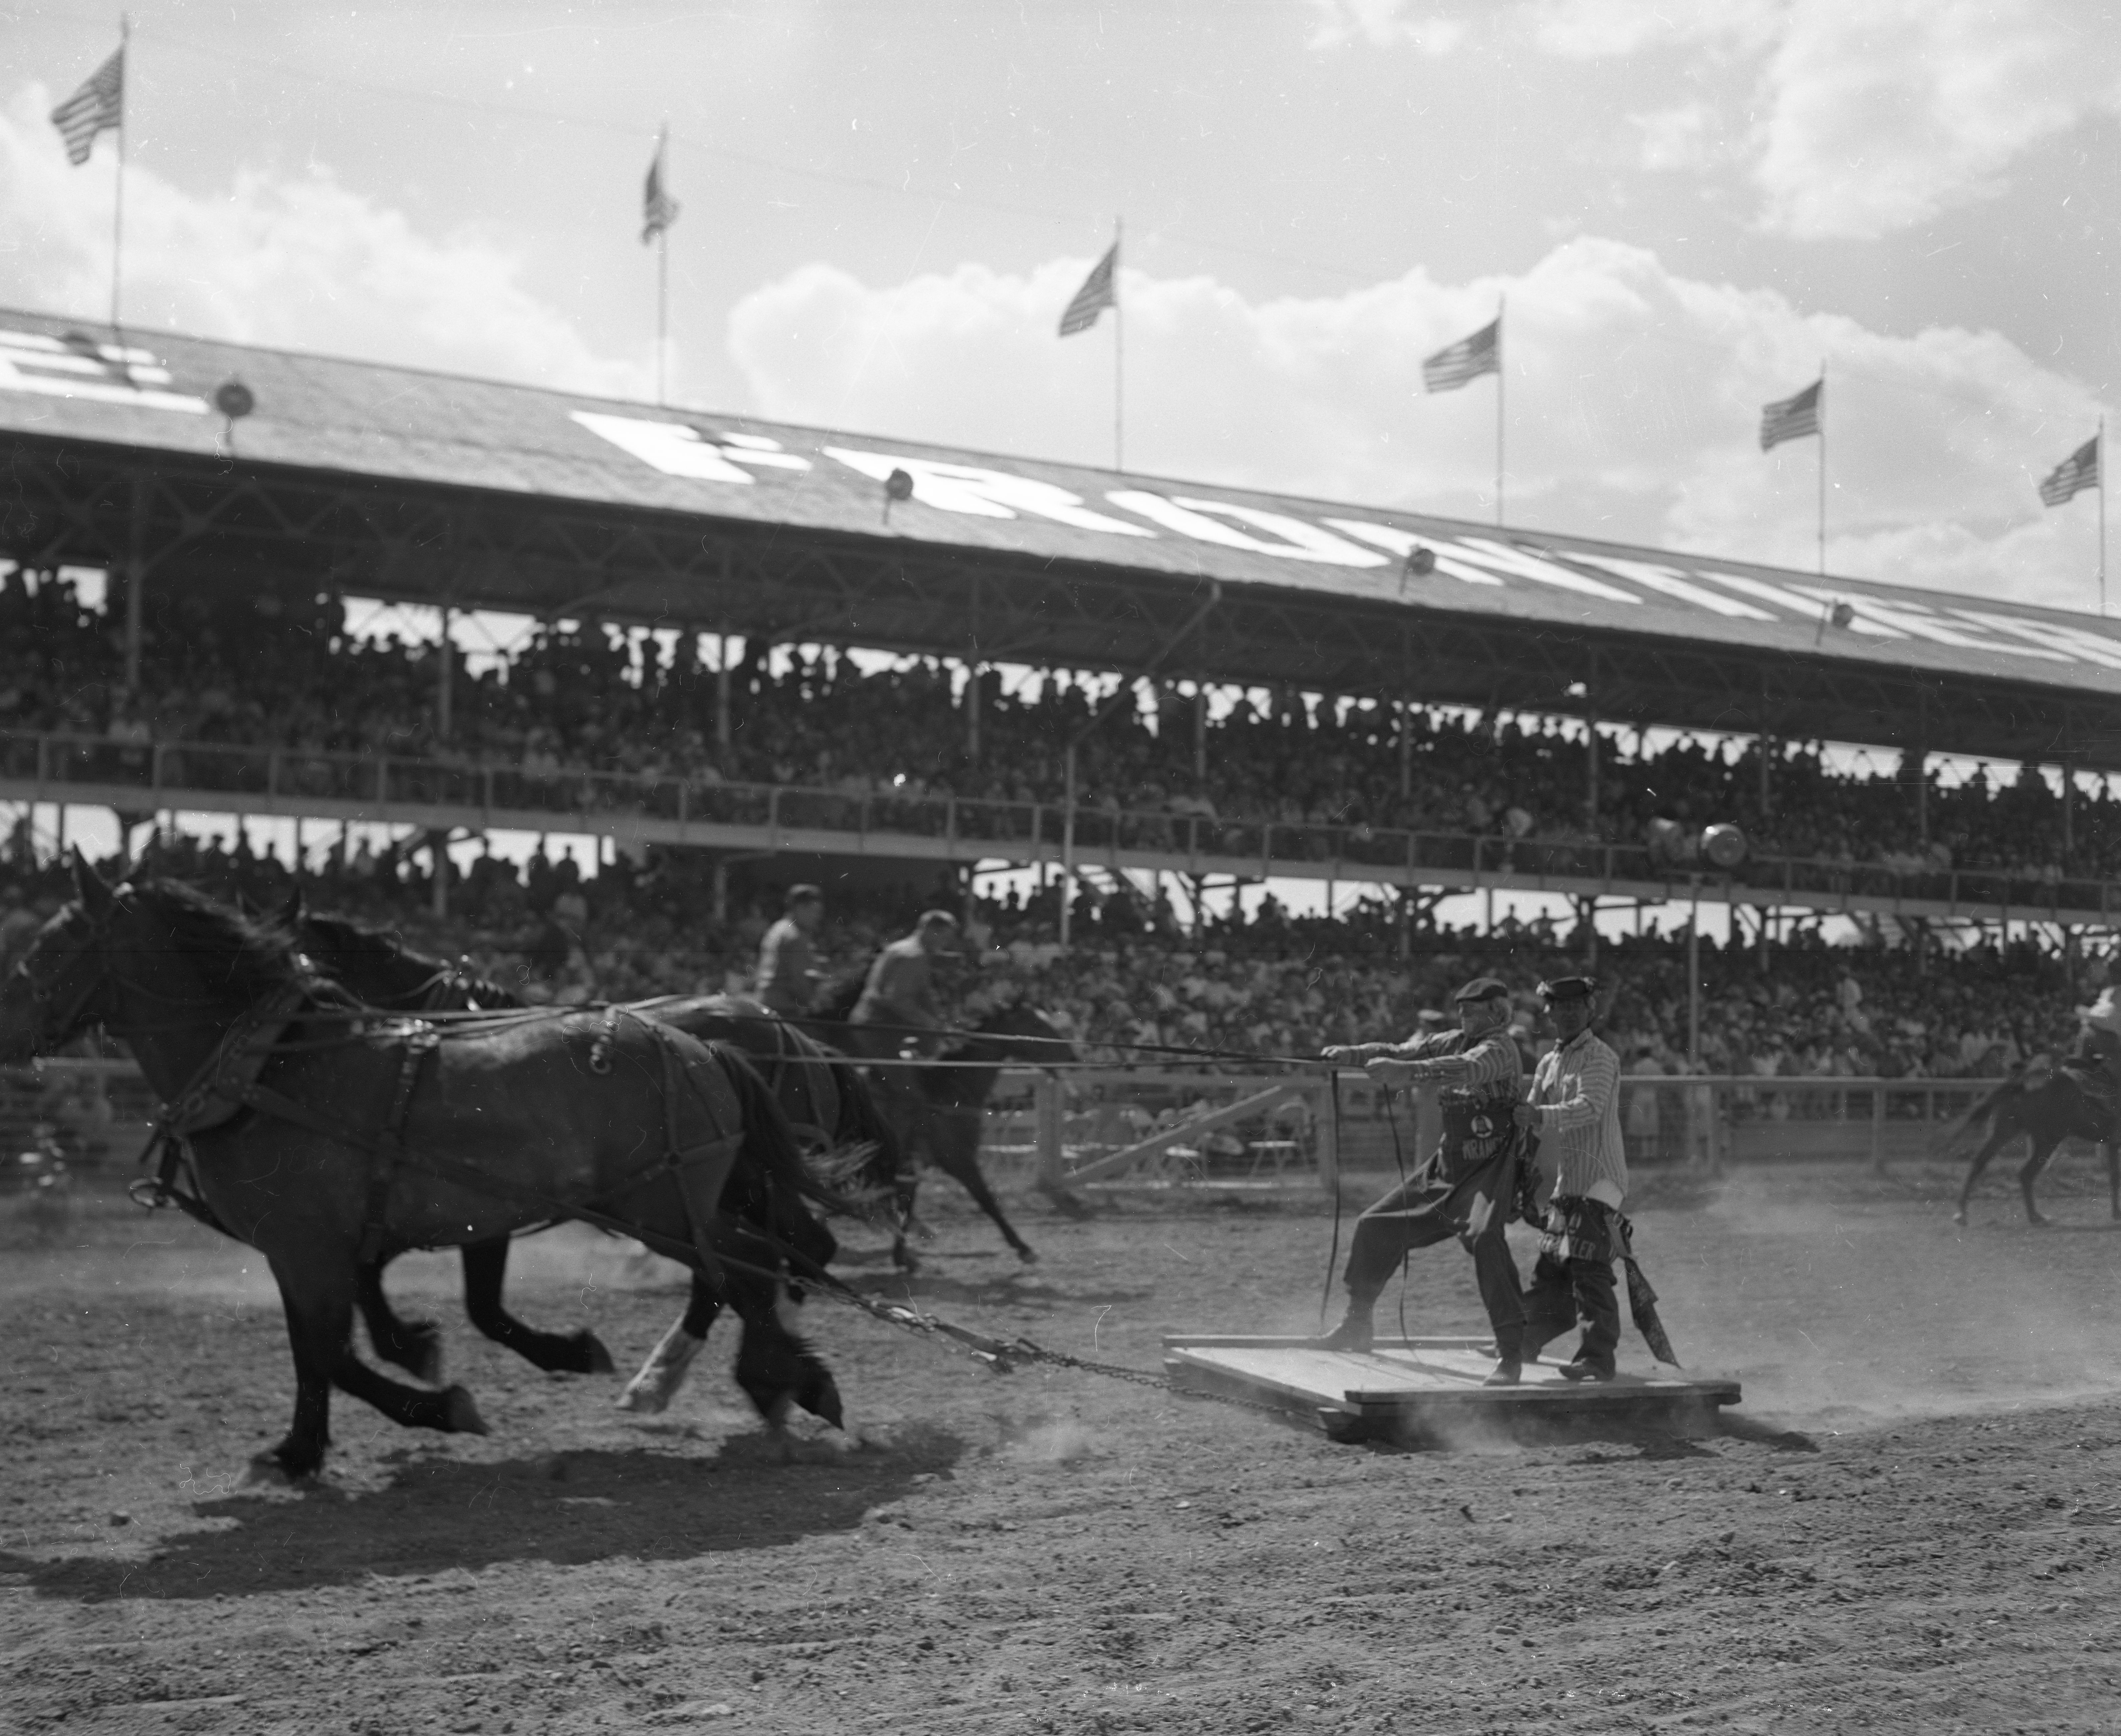 Rodeo clowns attempting to control horses while being pulled on a sled. 